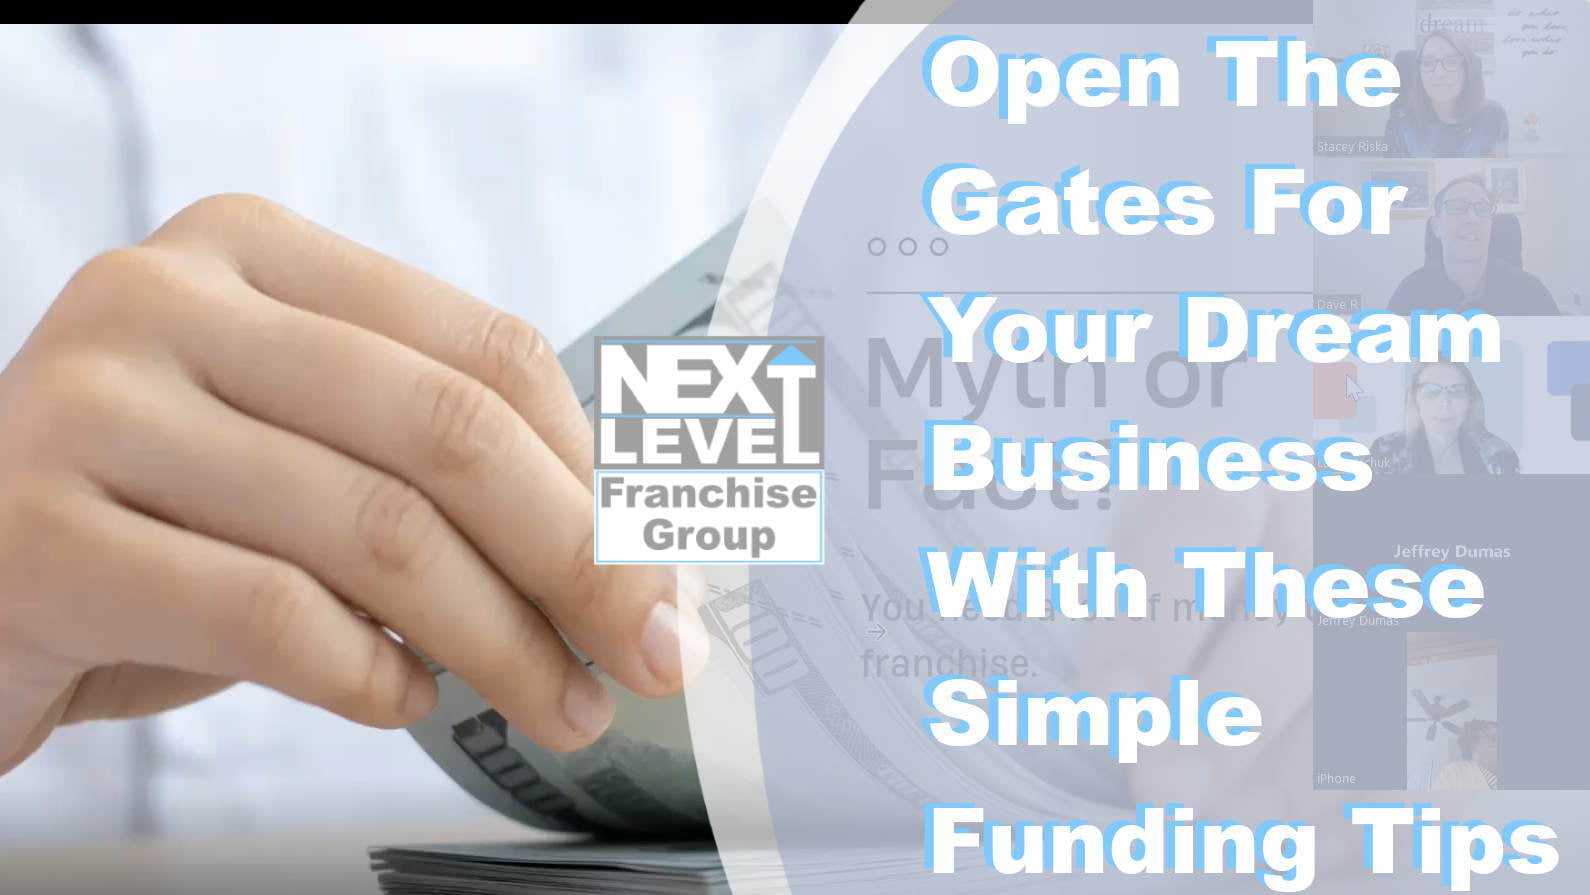 Open The Gates For Your Dream Business With These Simple Funding Tips